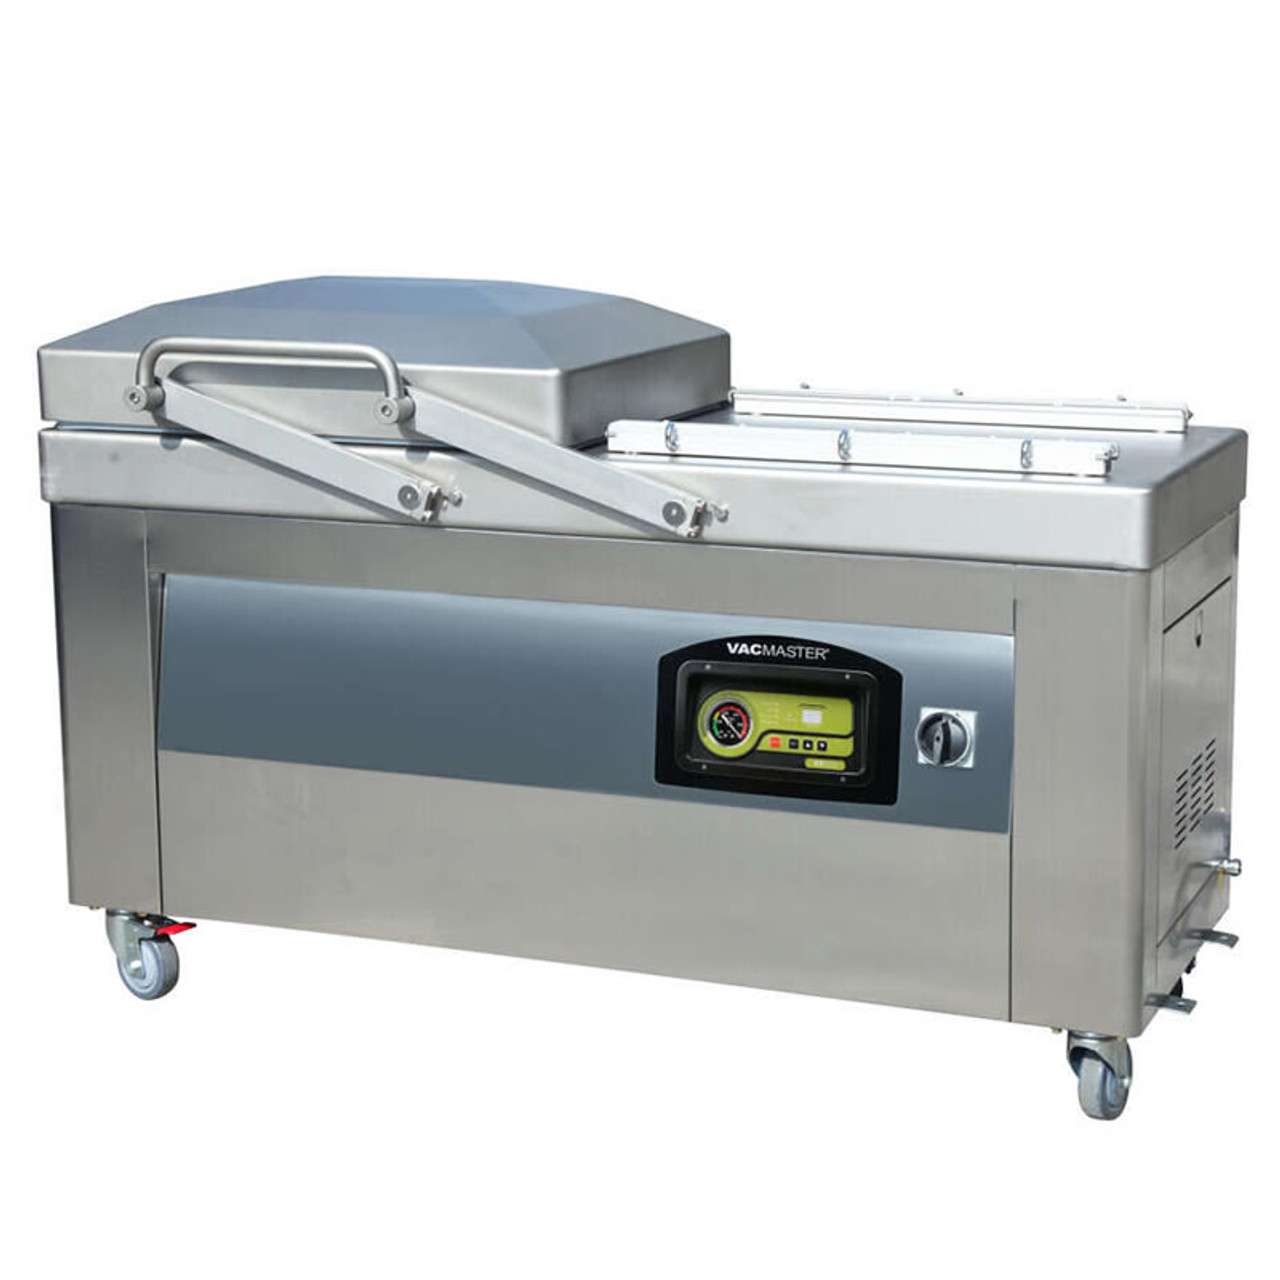 Commercial Single Chamber Vacuum Sealer with Dual Seal Bars